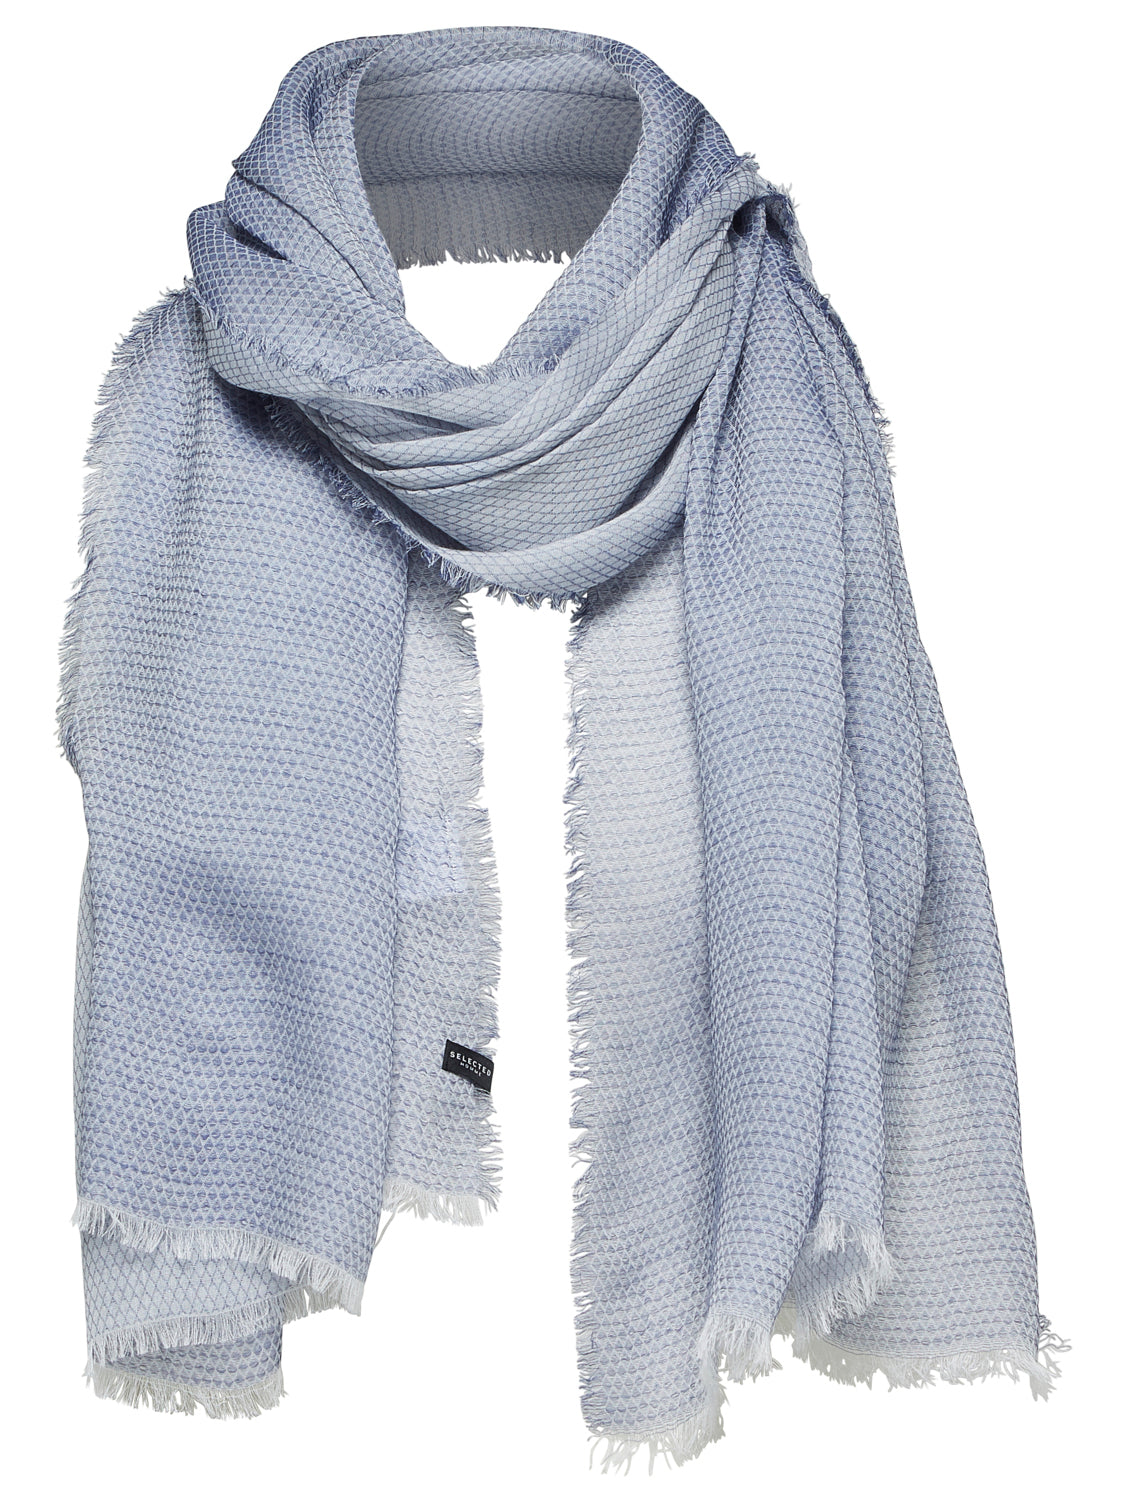 SELECTED HOMME - RAFAEL Scarf - Light Blue